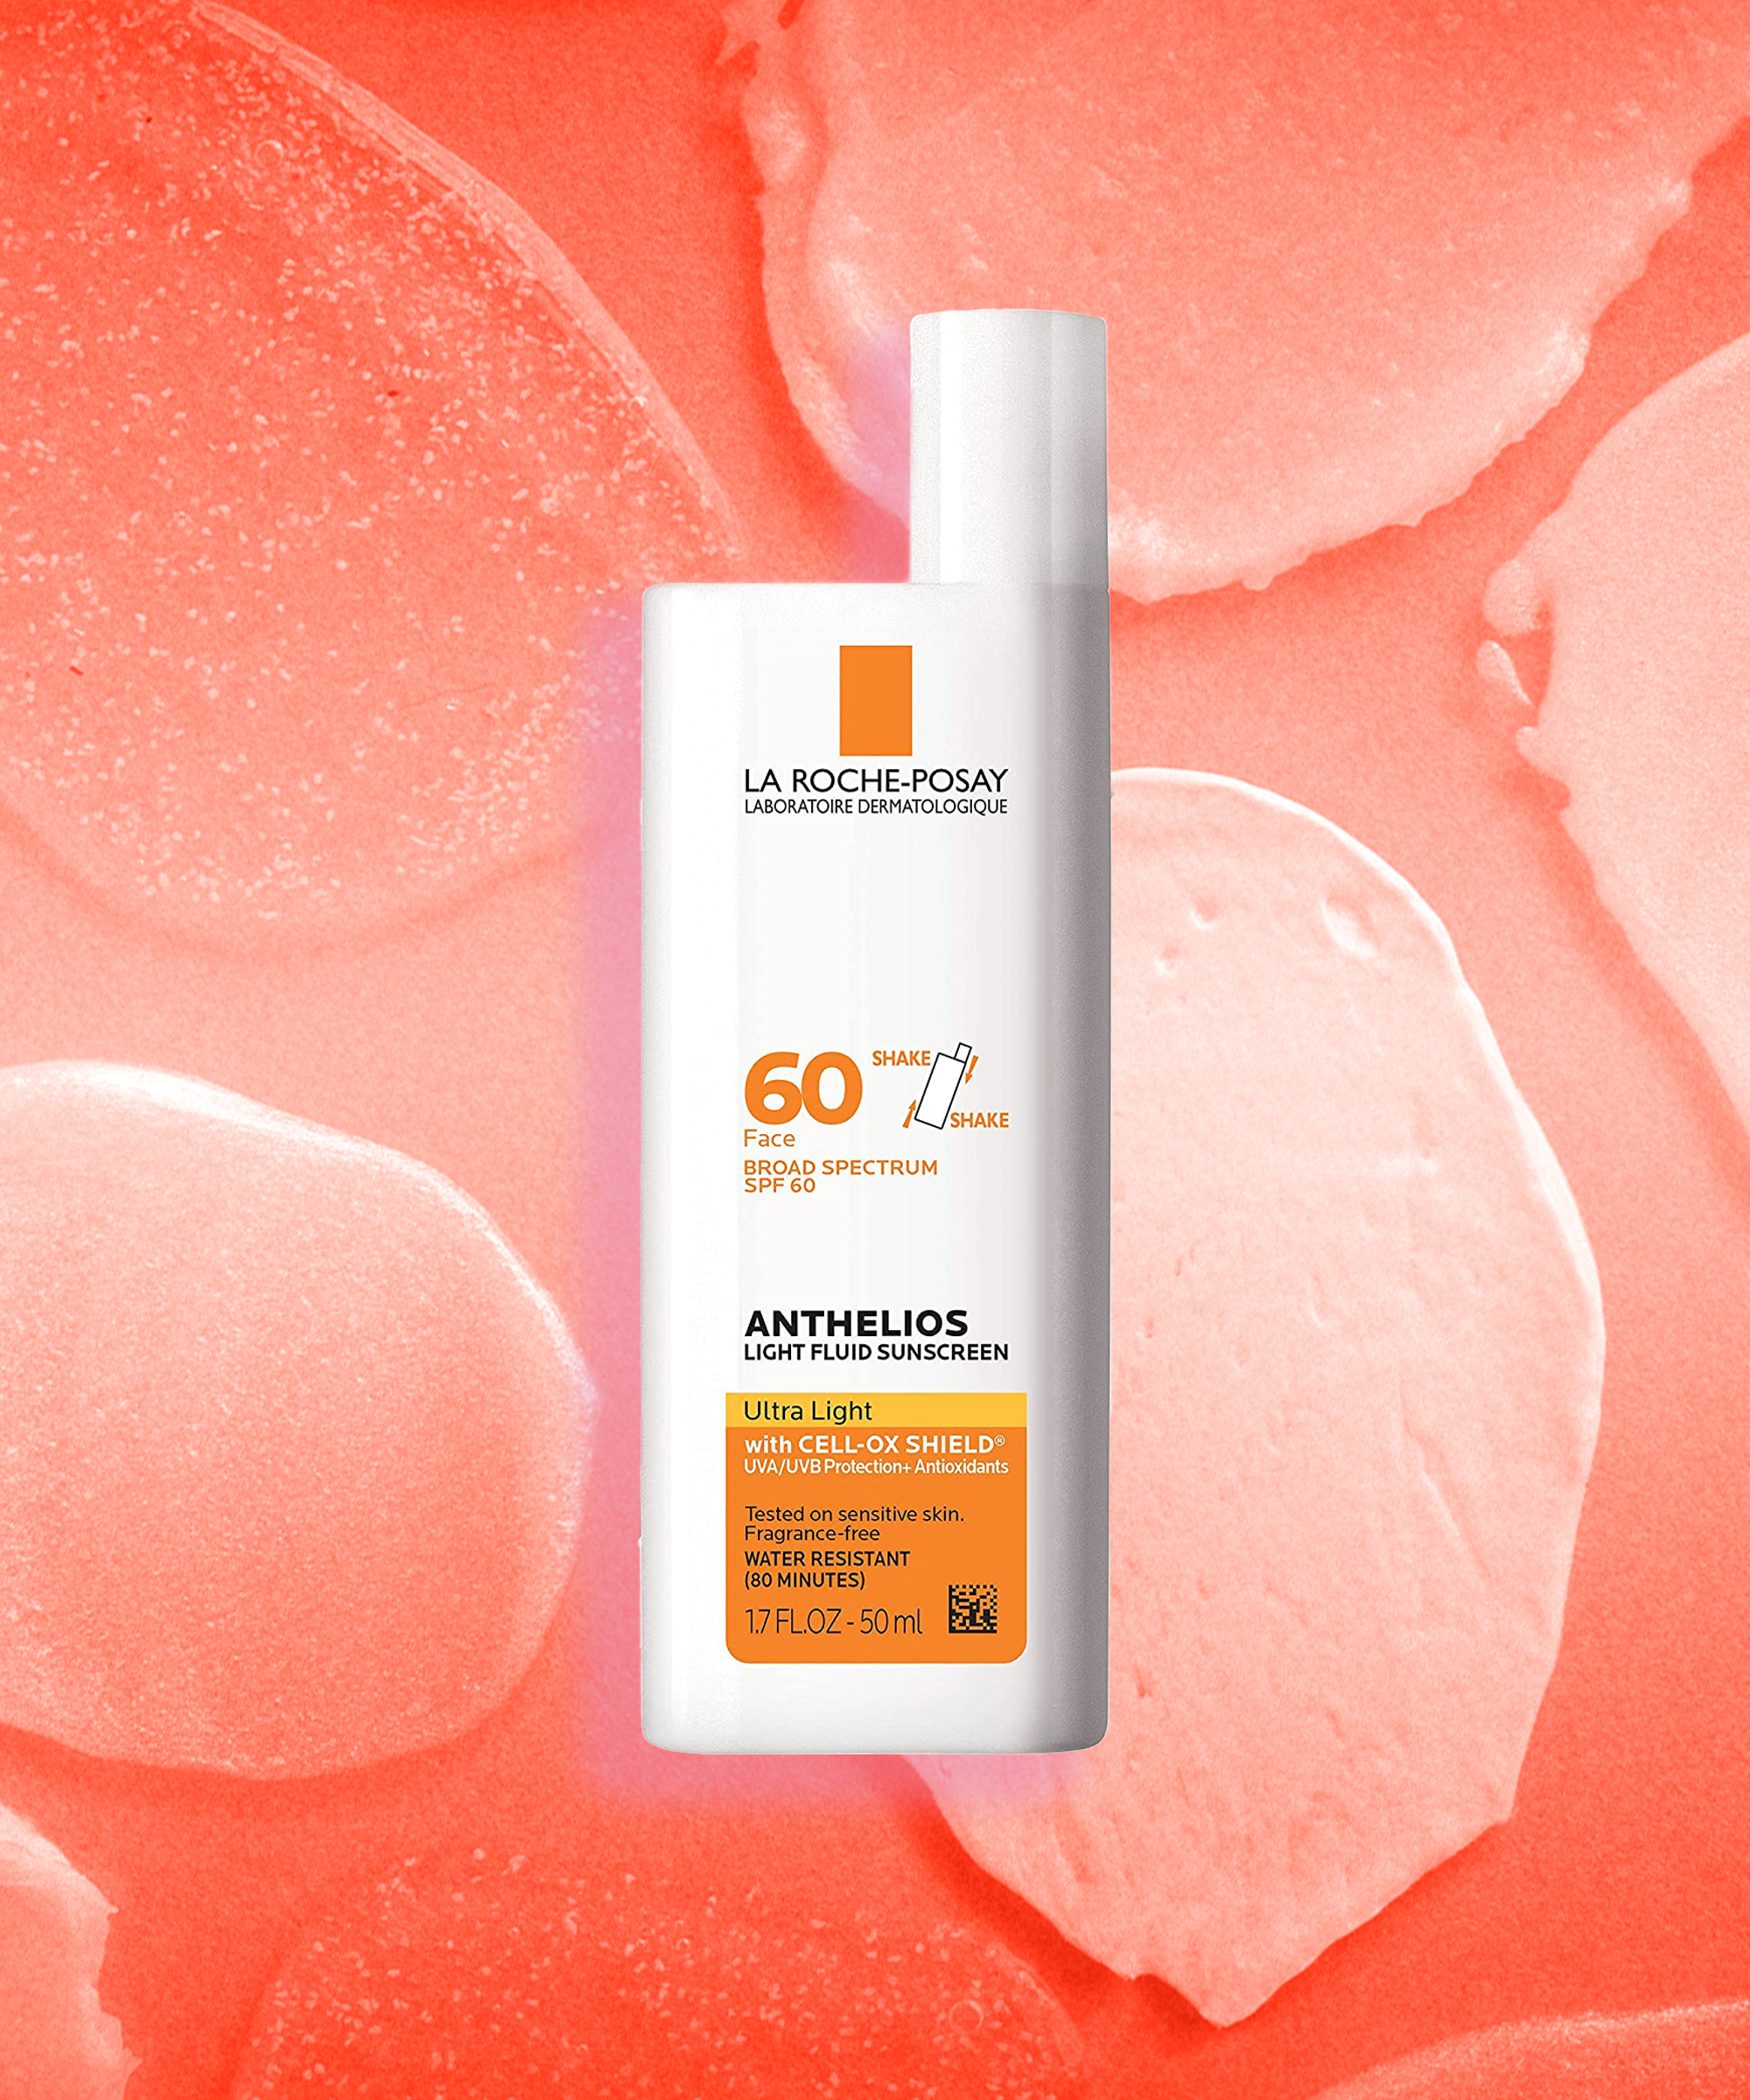 Oil control tinted / sun protection for oily and acne prone skin